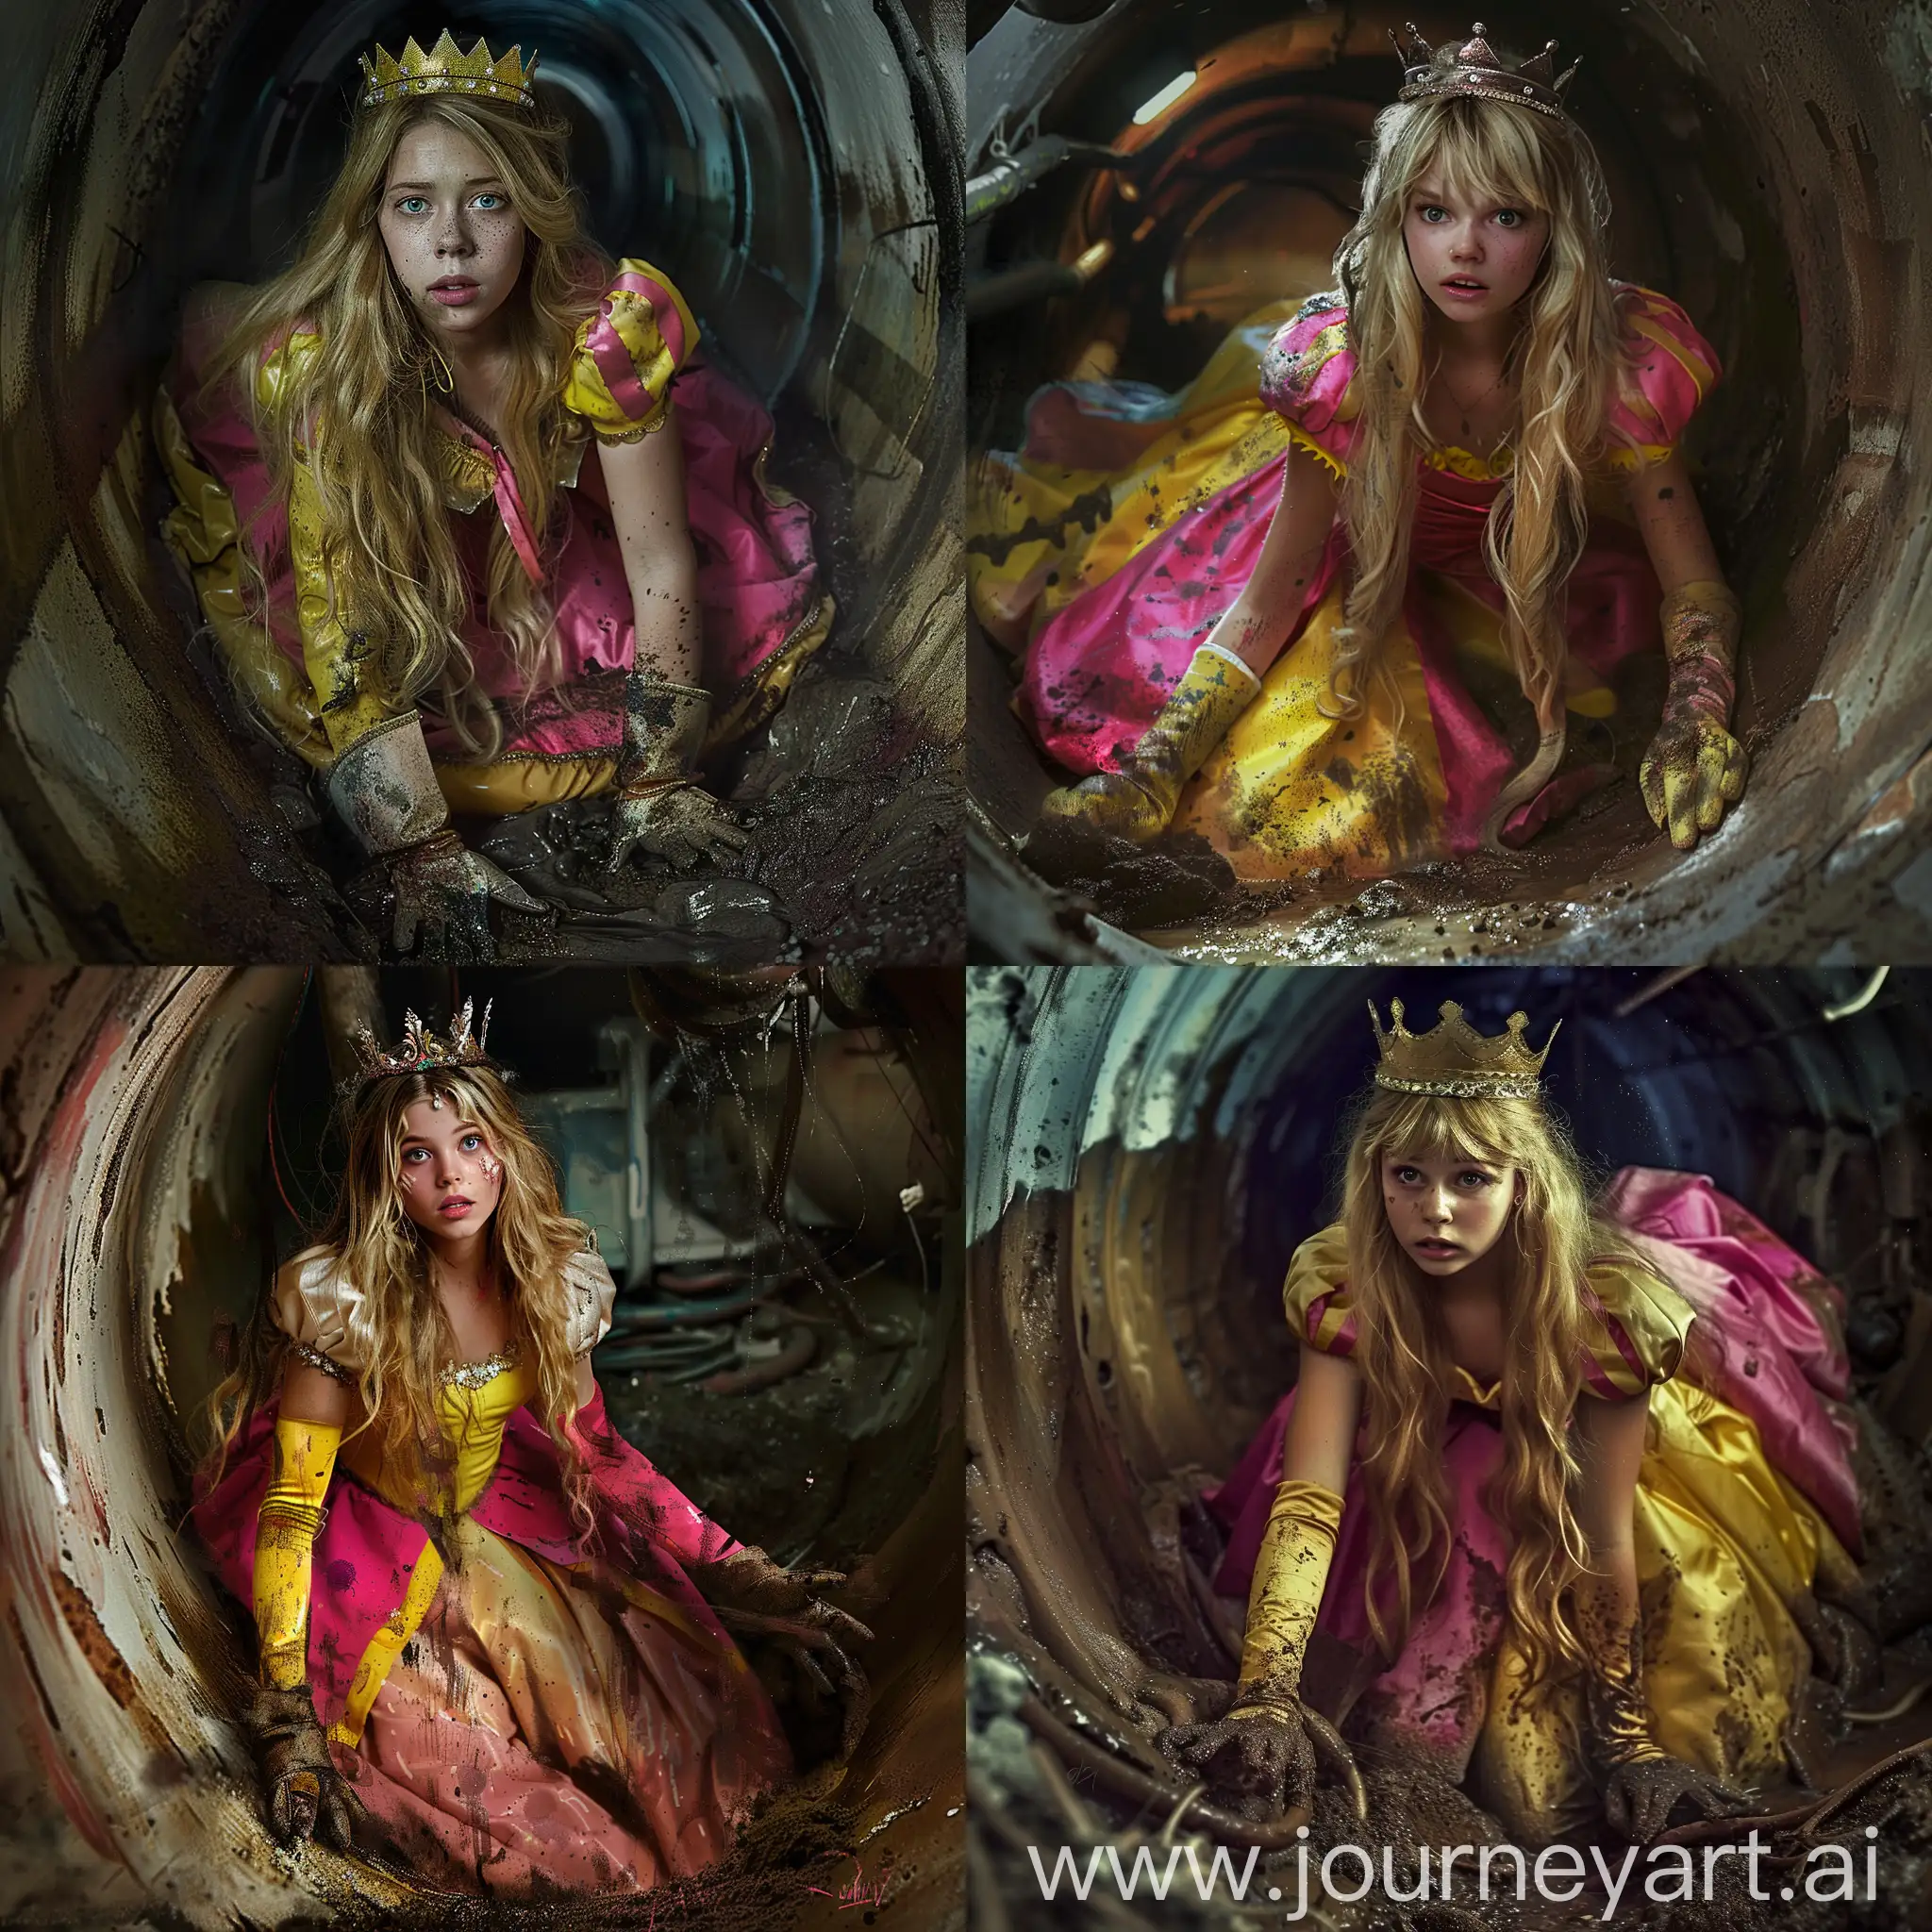 Create an image of a young woman dressed as a princess with long blonde hair and wearing a crown. She's crawling through what appears to be a grimy, sewer-like tunnel, with dirt and grime on her dress and gloves. The princess's dress is a mix of vibrant pink and yellow, but it's visibly soiled. Her expression should show determination or concern as she navigates through this unusual environment. The lighting is low, adding a gritty and adventurous atmosphere to the scene.